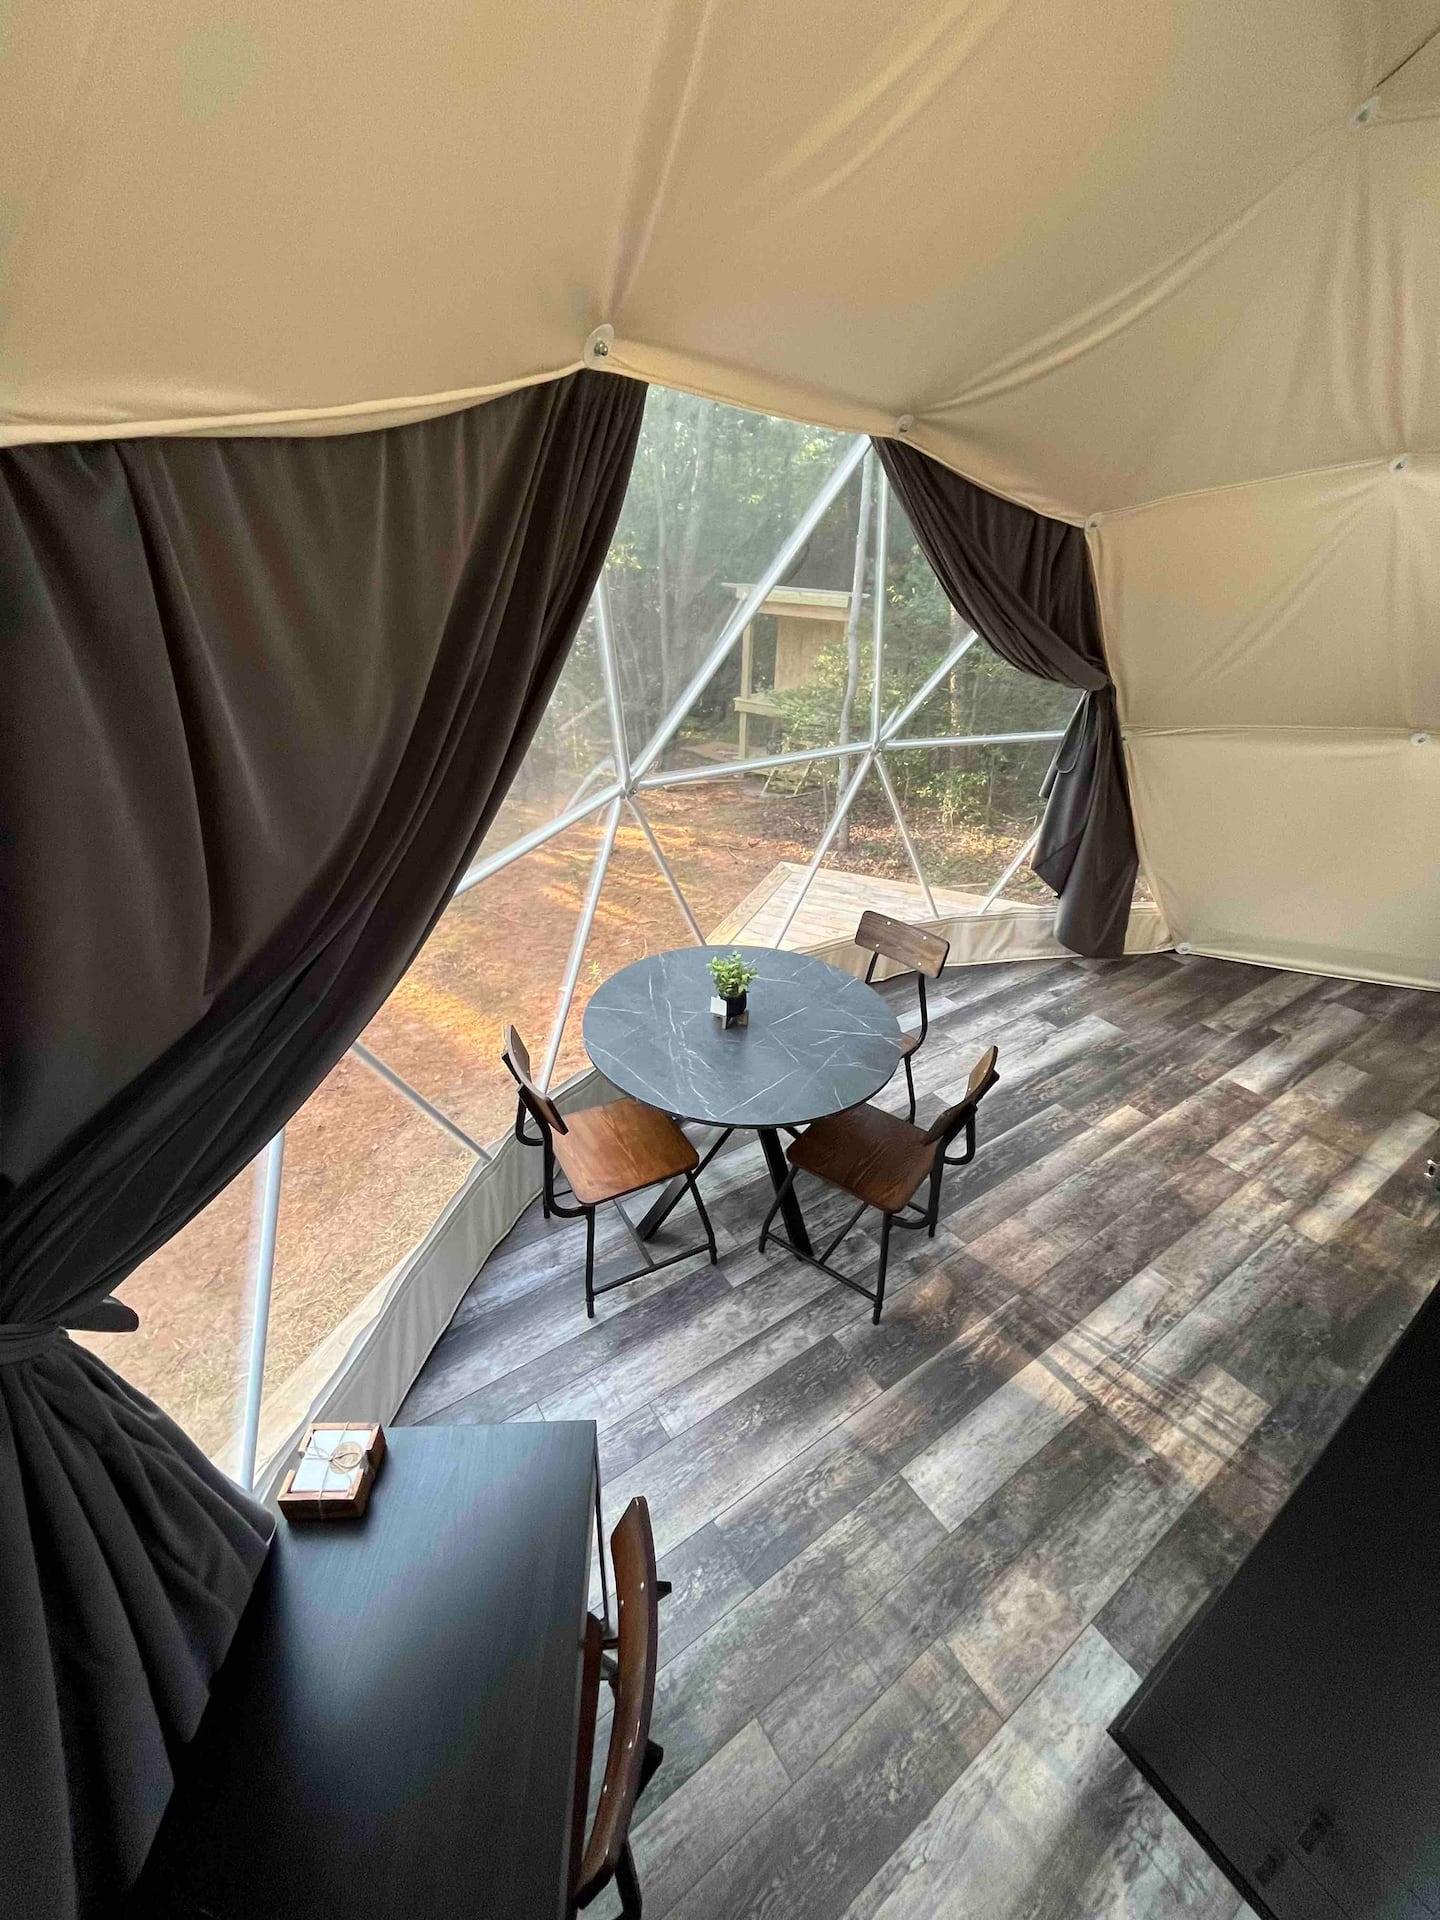 interior of geodesic dome with view window, curtains and coffee table